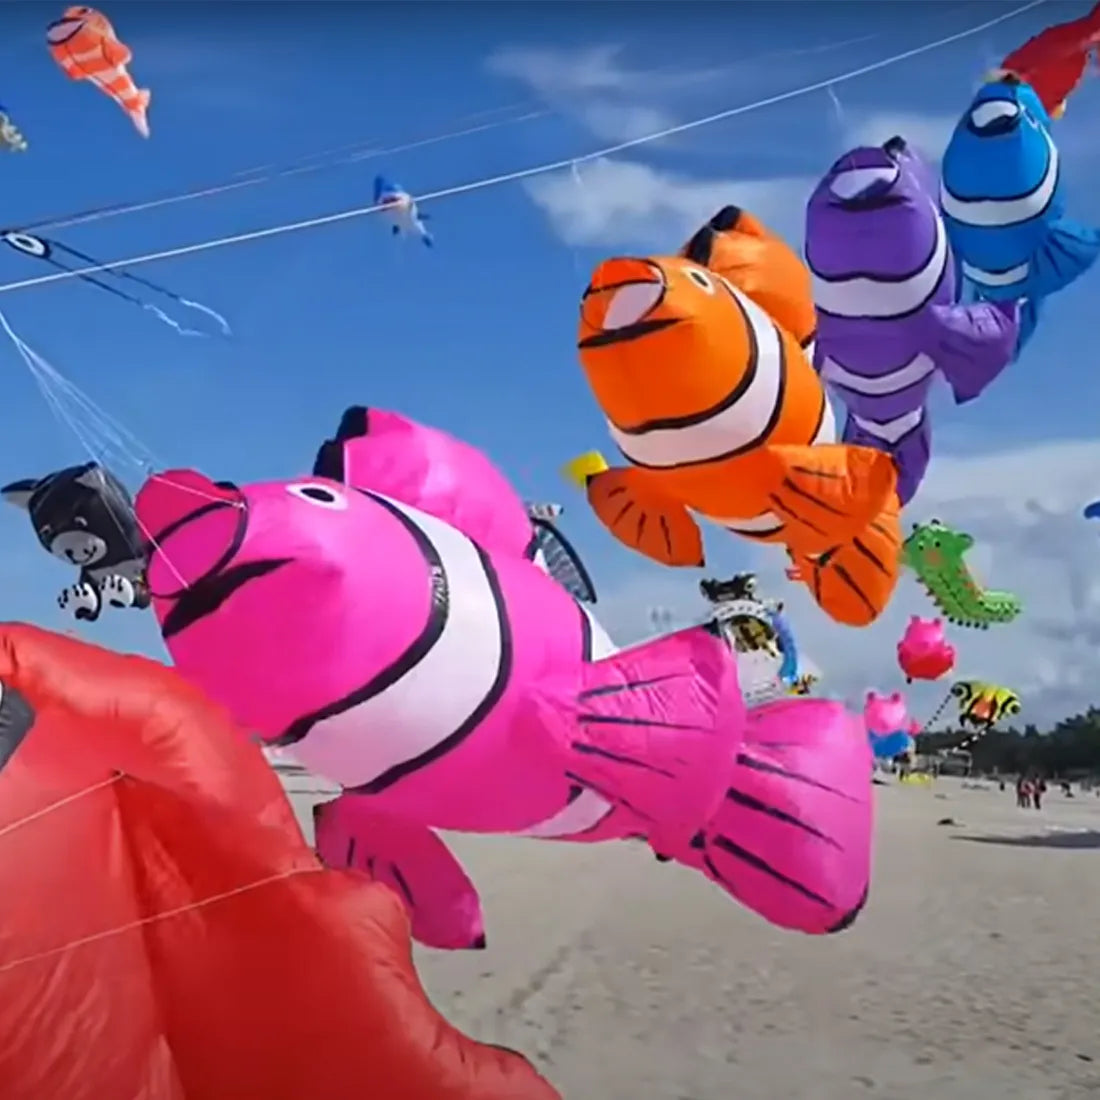 Colorful 3D Hanging Clownfish Kite - Outdoor Power Kite